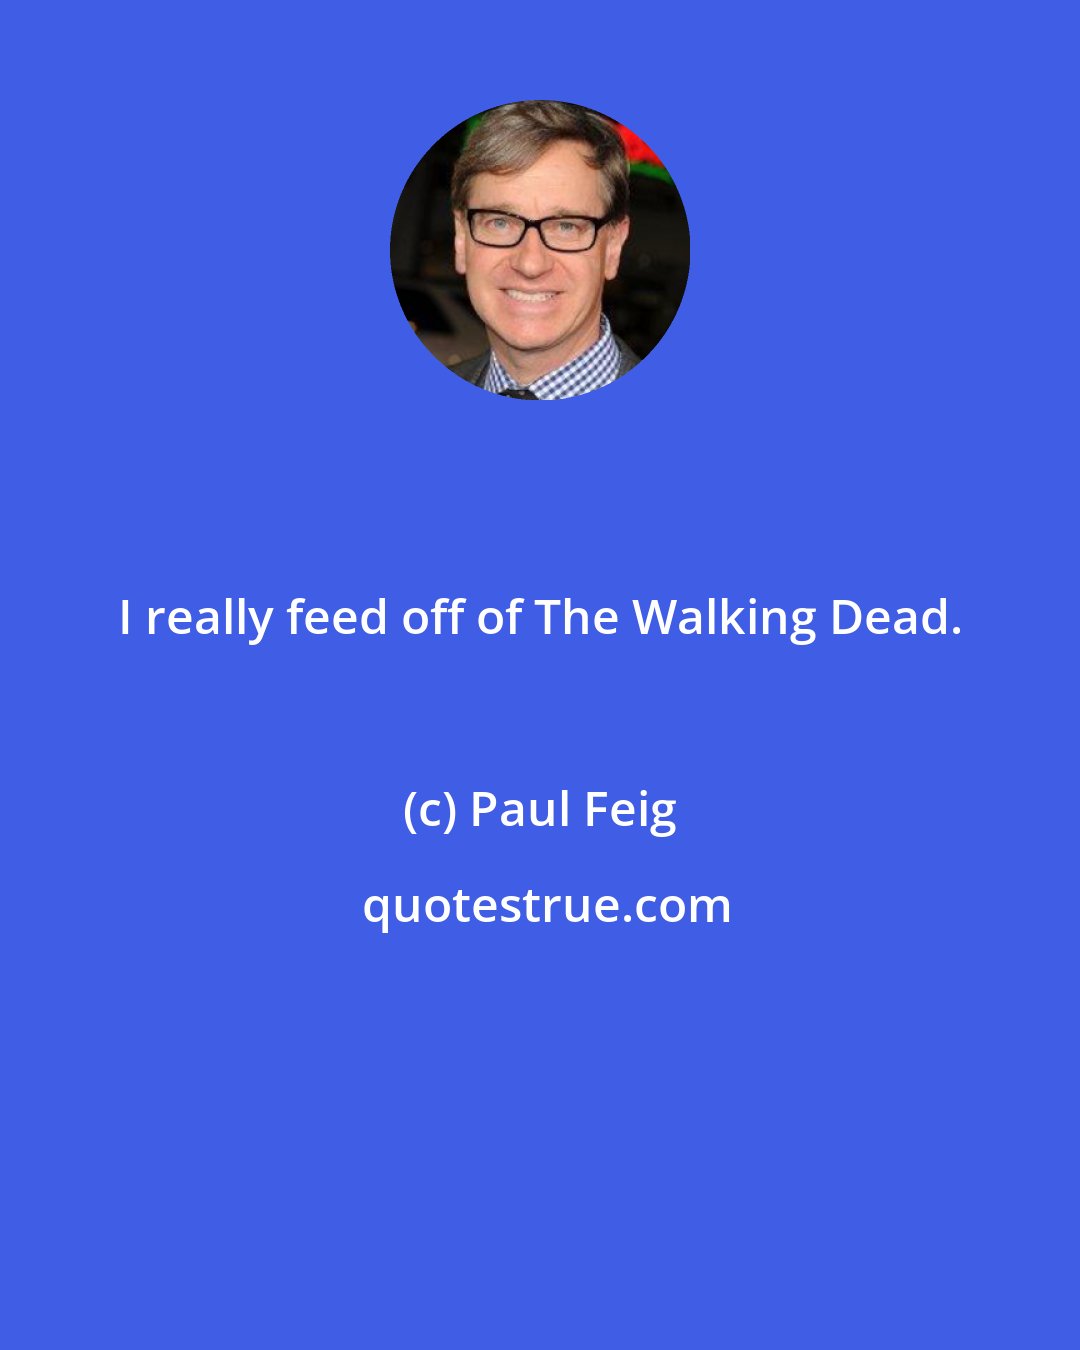 Paul Feig: I really feed off of The Walking Dead.